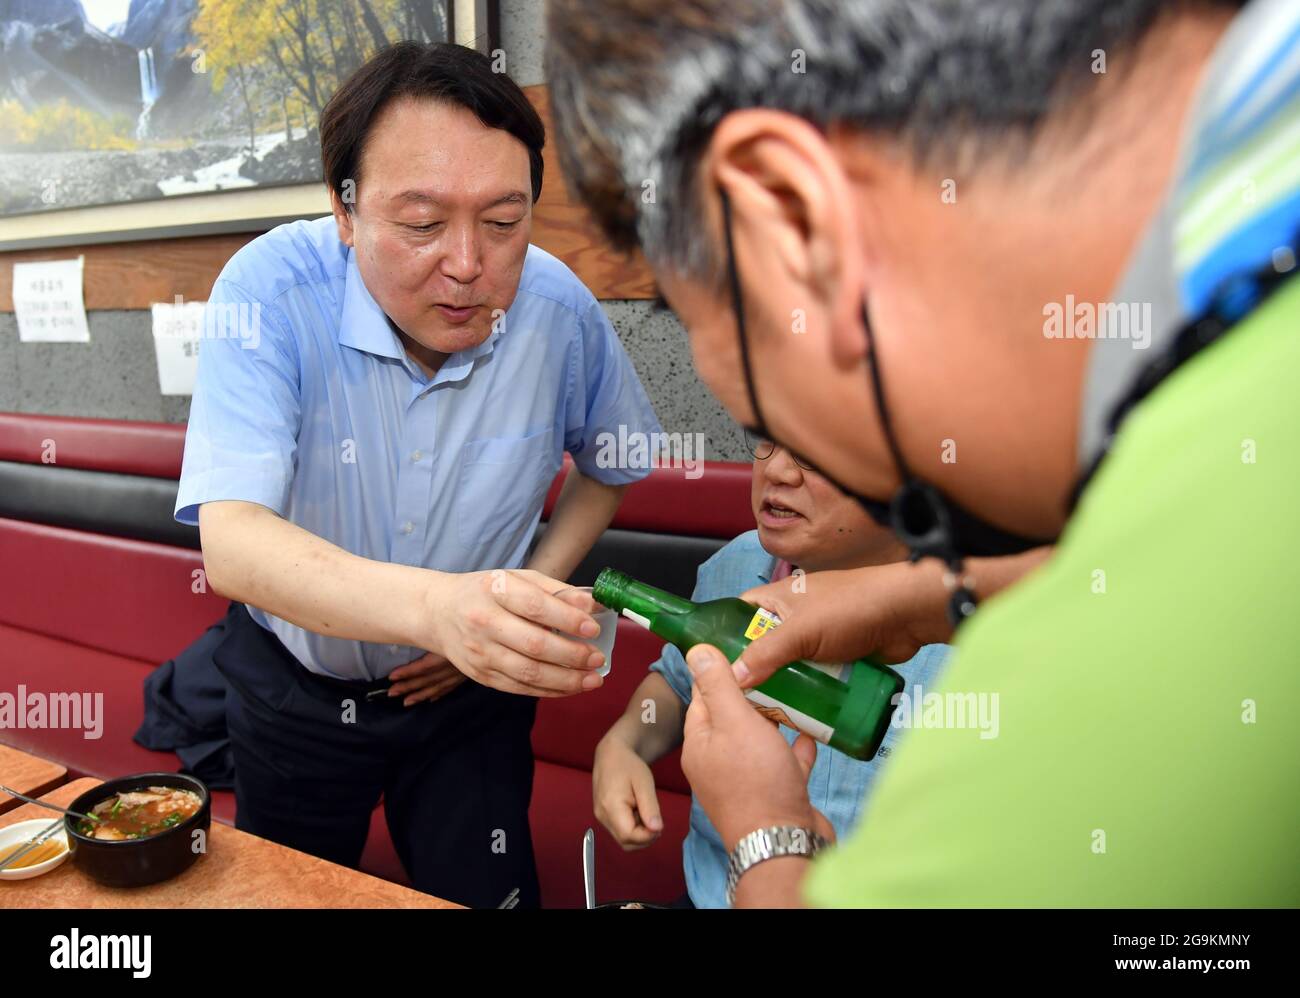 27th July, 2021. 27th July, 2021. Presidential hopeful at restaurant Former Prosecutor General Yoon Seok-youl (L), a presidential hopeful of the opposition bloc, receives a glass of soju, a distilled beverage made of ethanol and water, from a man at a pork soup restaurant in the southeastern port city of Busan on July 27, 2021. (Pool photo) Credit: Yonhap/Newcom/Alamy Live News Credit: Yonhap/Newcom/Alamy Live News Stock Photo